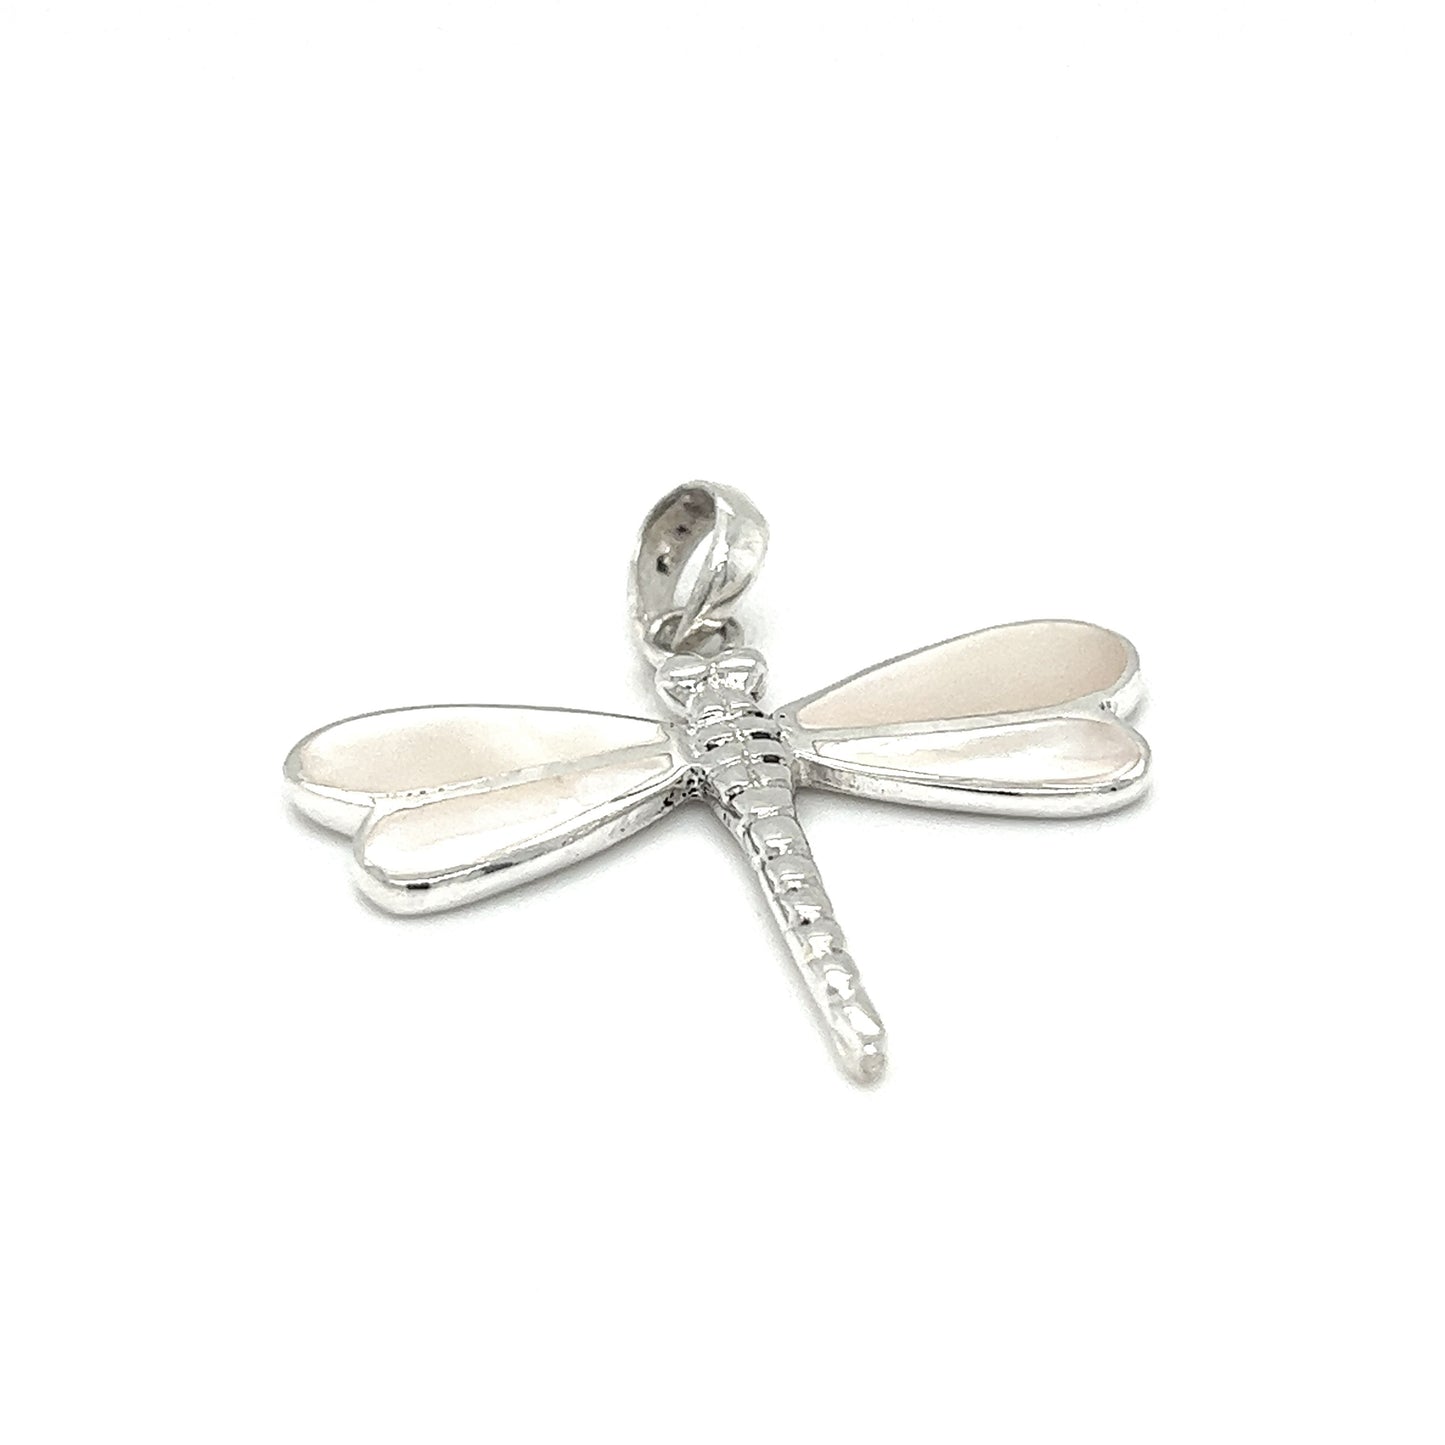 
                  
                    A Super Silver Dragonfly Inlay Stone Pendant featuring abalone and mother of pearl accents, resting delicately on a pristine white background.
                  
                